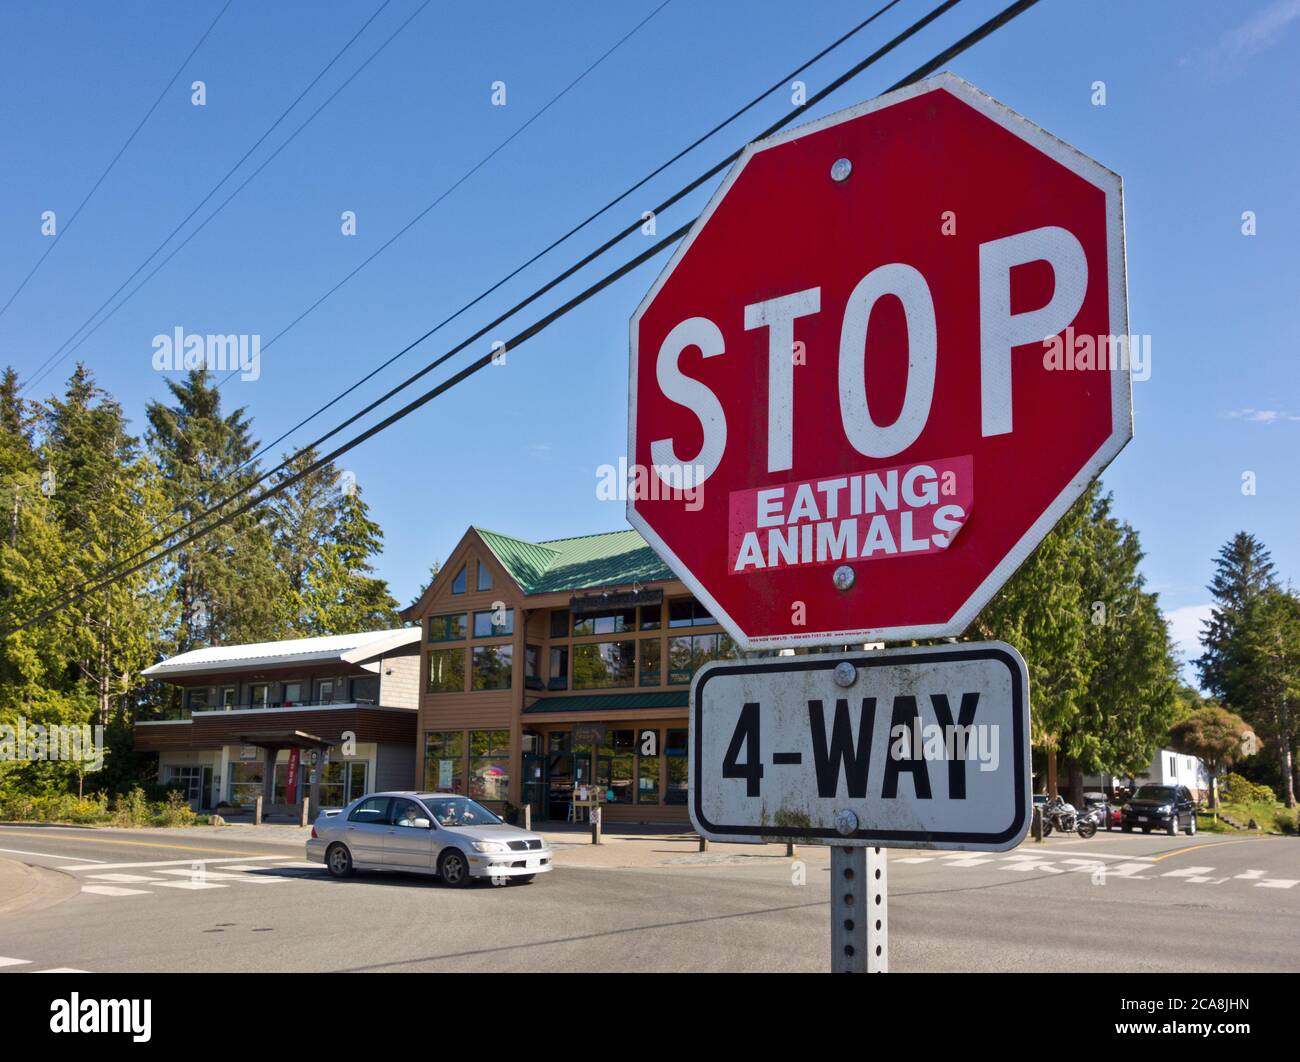 'Stop Eating Animals'.  Stop sign in Tofino, Canada,  with sticker added to promote vegetarianism or veganism. Stock Photo